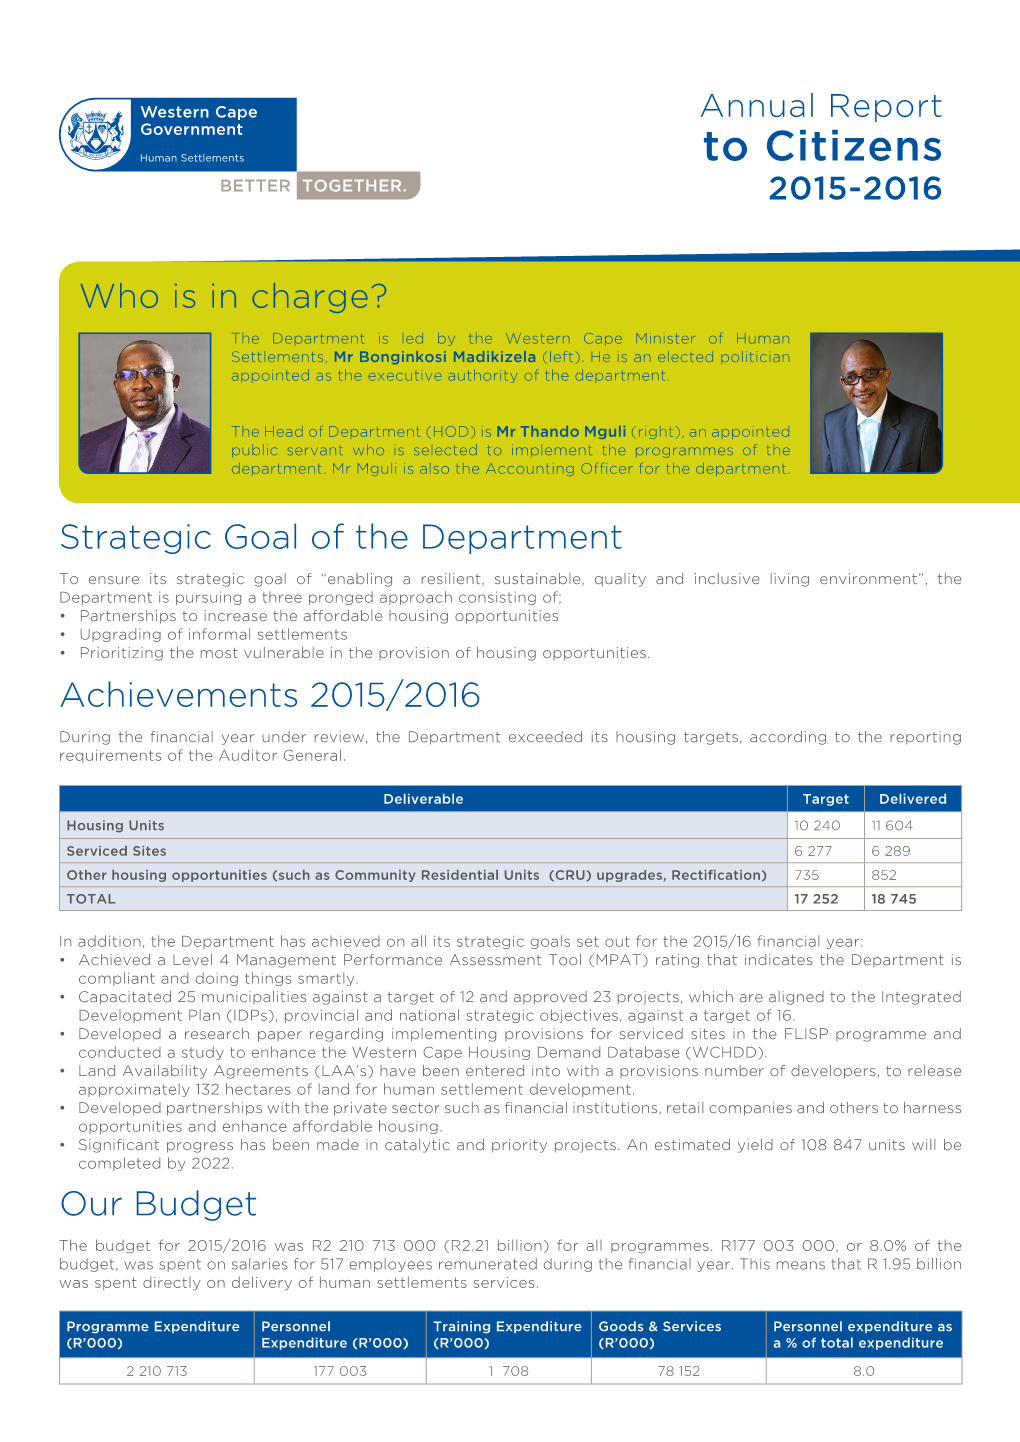 Annual Report to Citizens 2015/2016